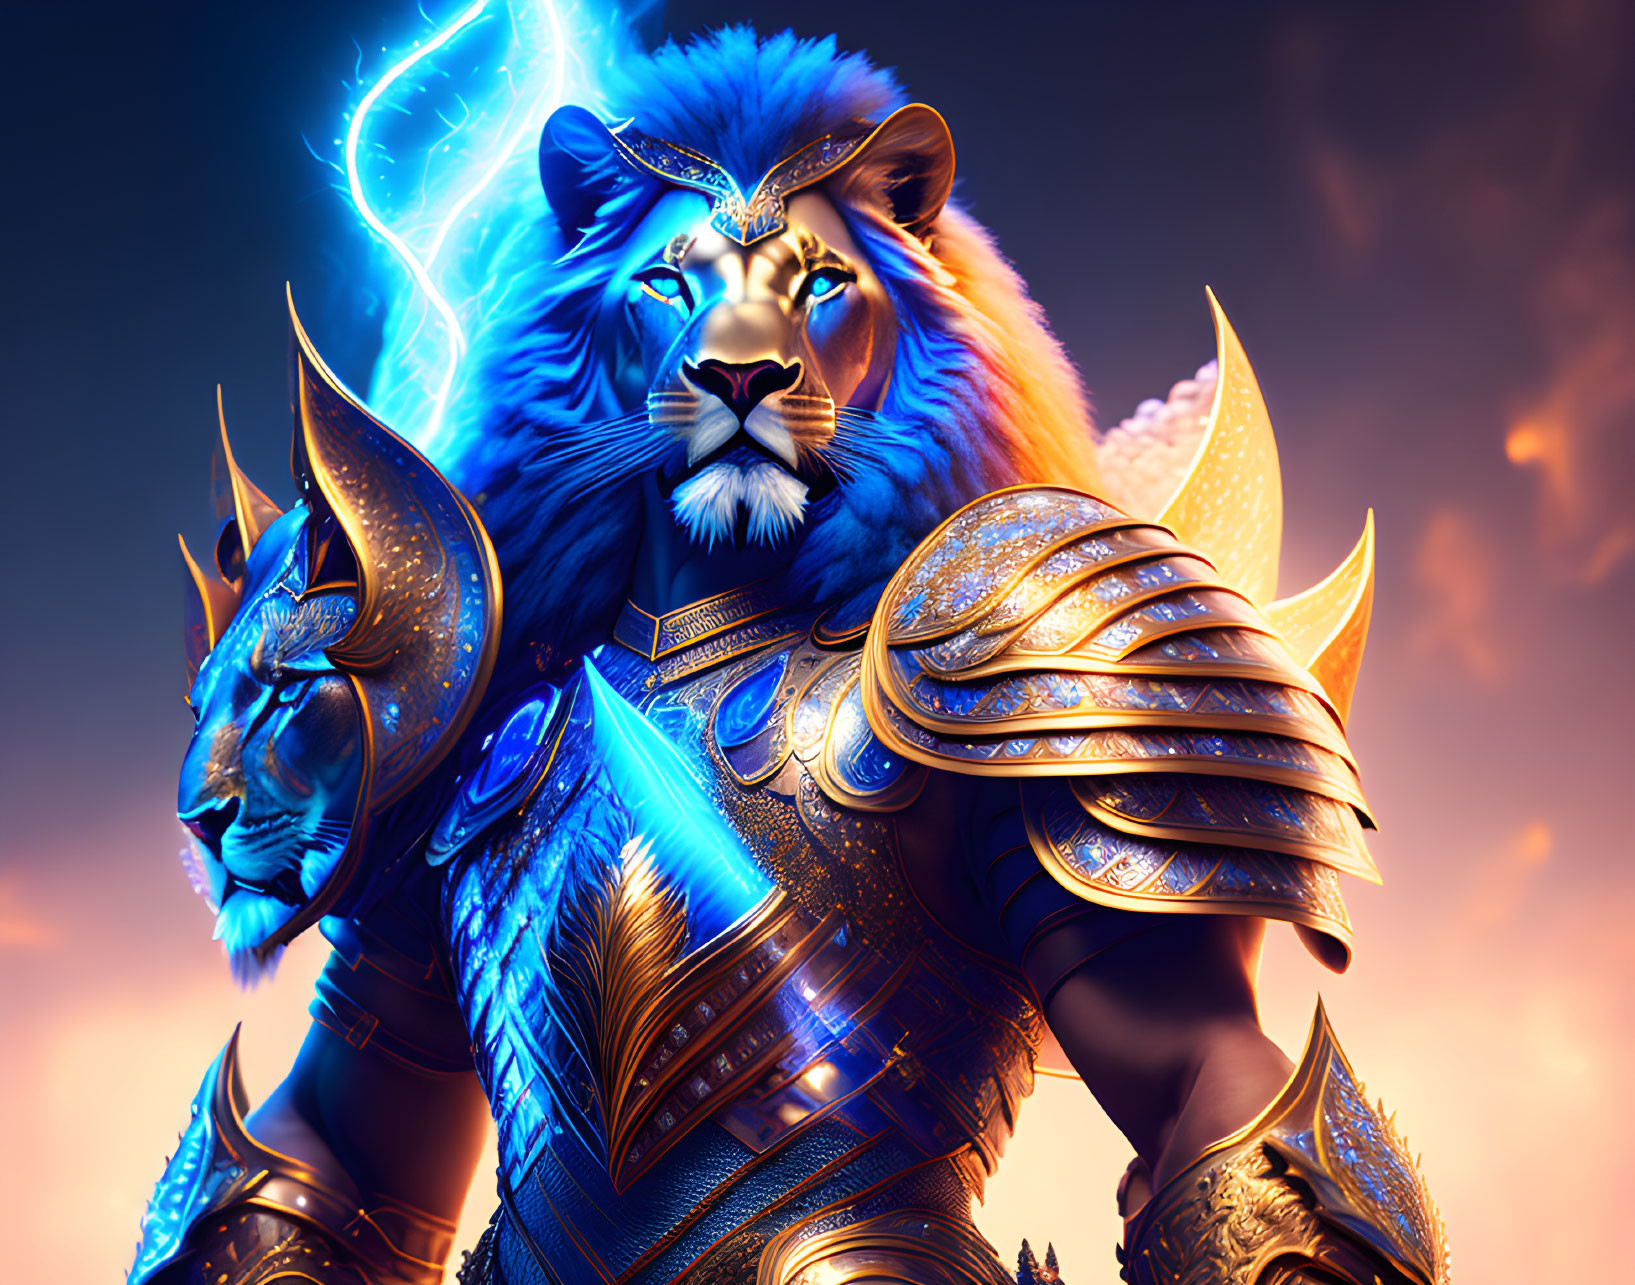 Majestic lion warrior in ornate armor with blue energy on sunset backdrop